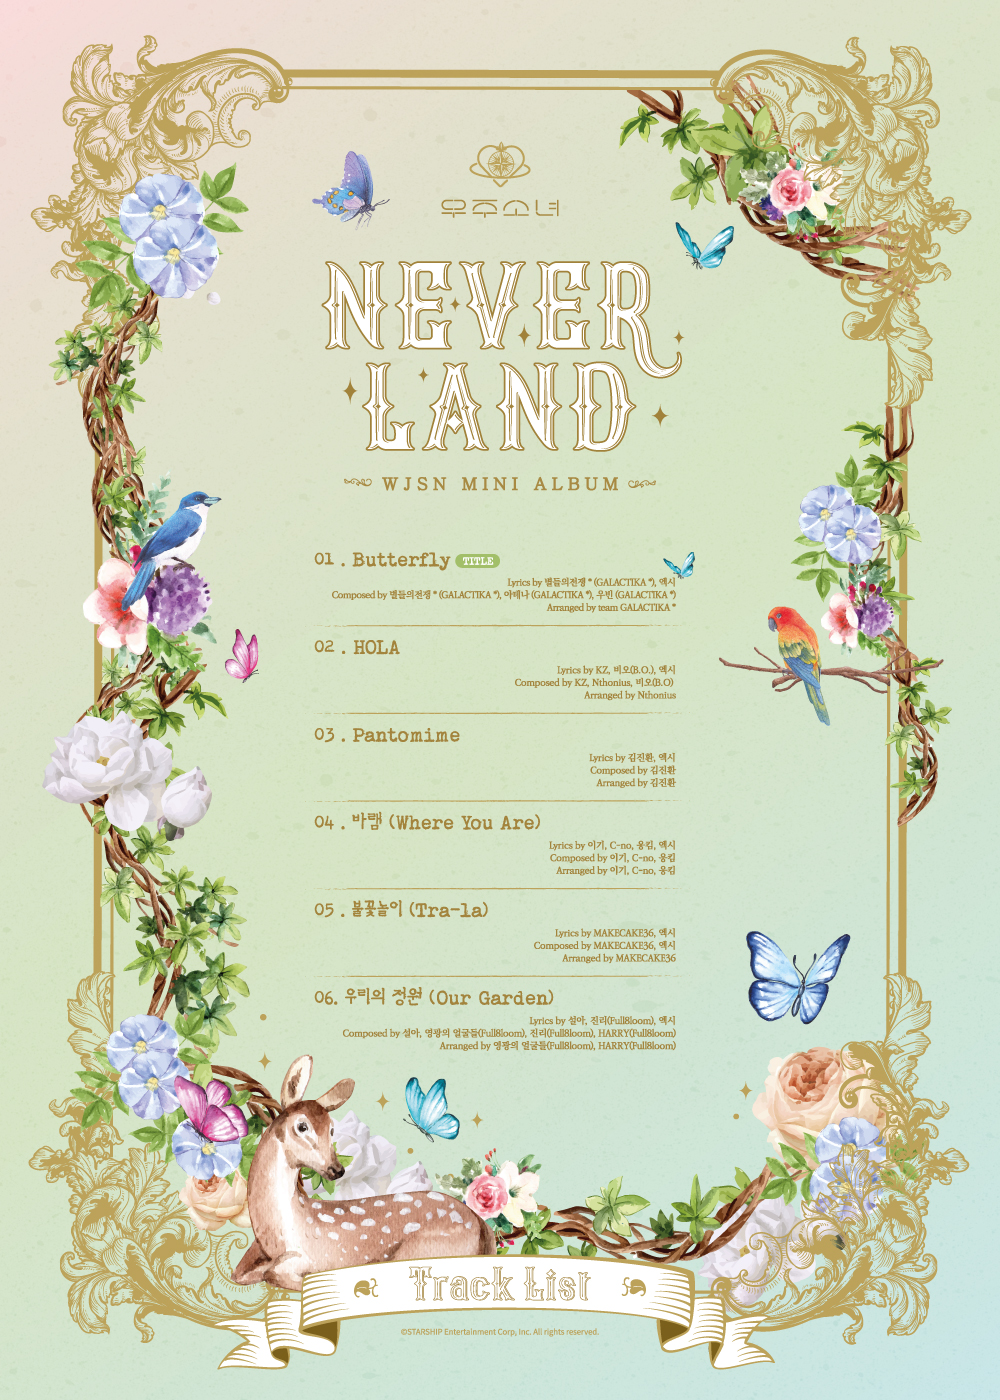 What's the 'NEVERLAND' font?